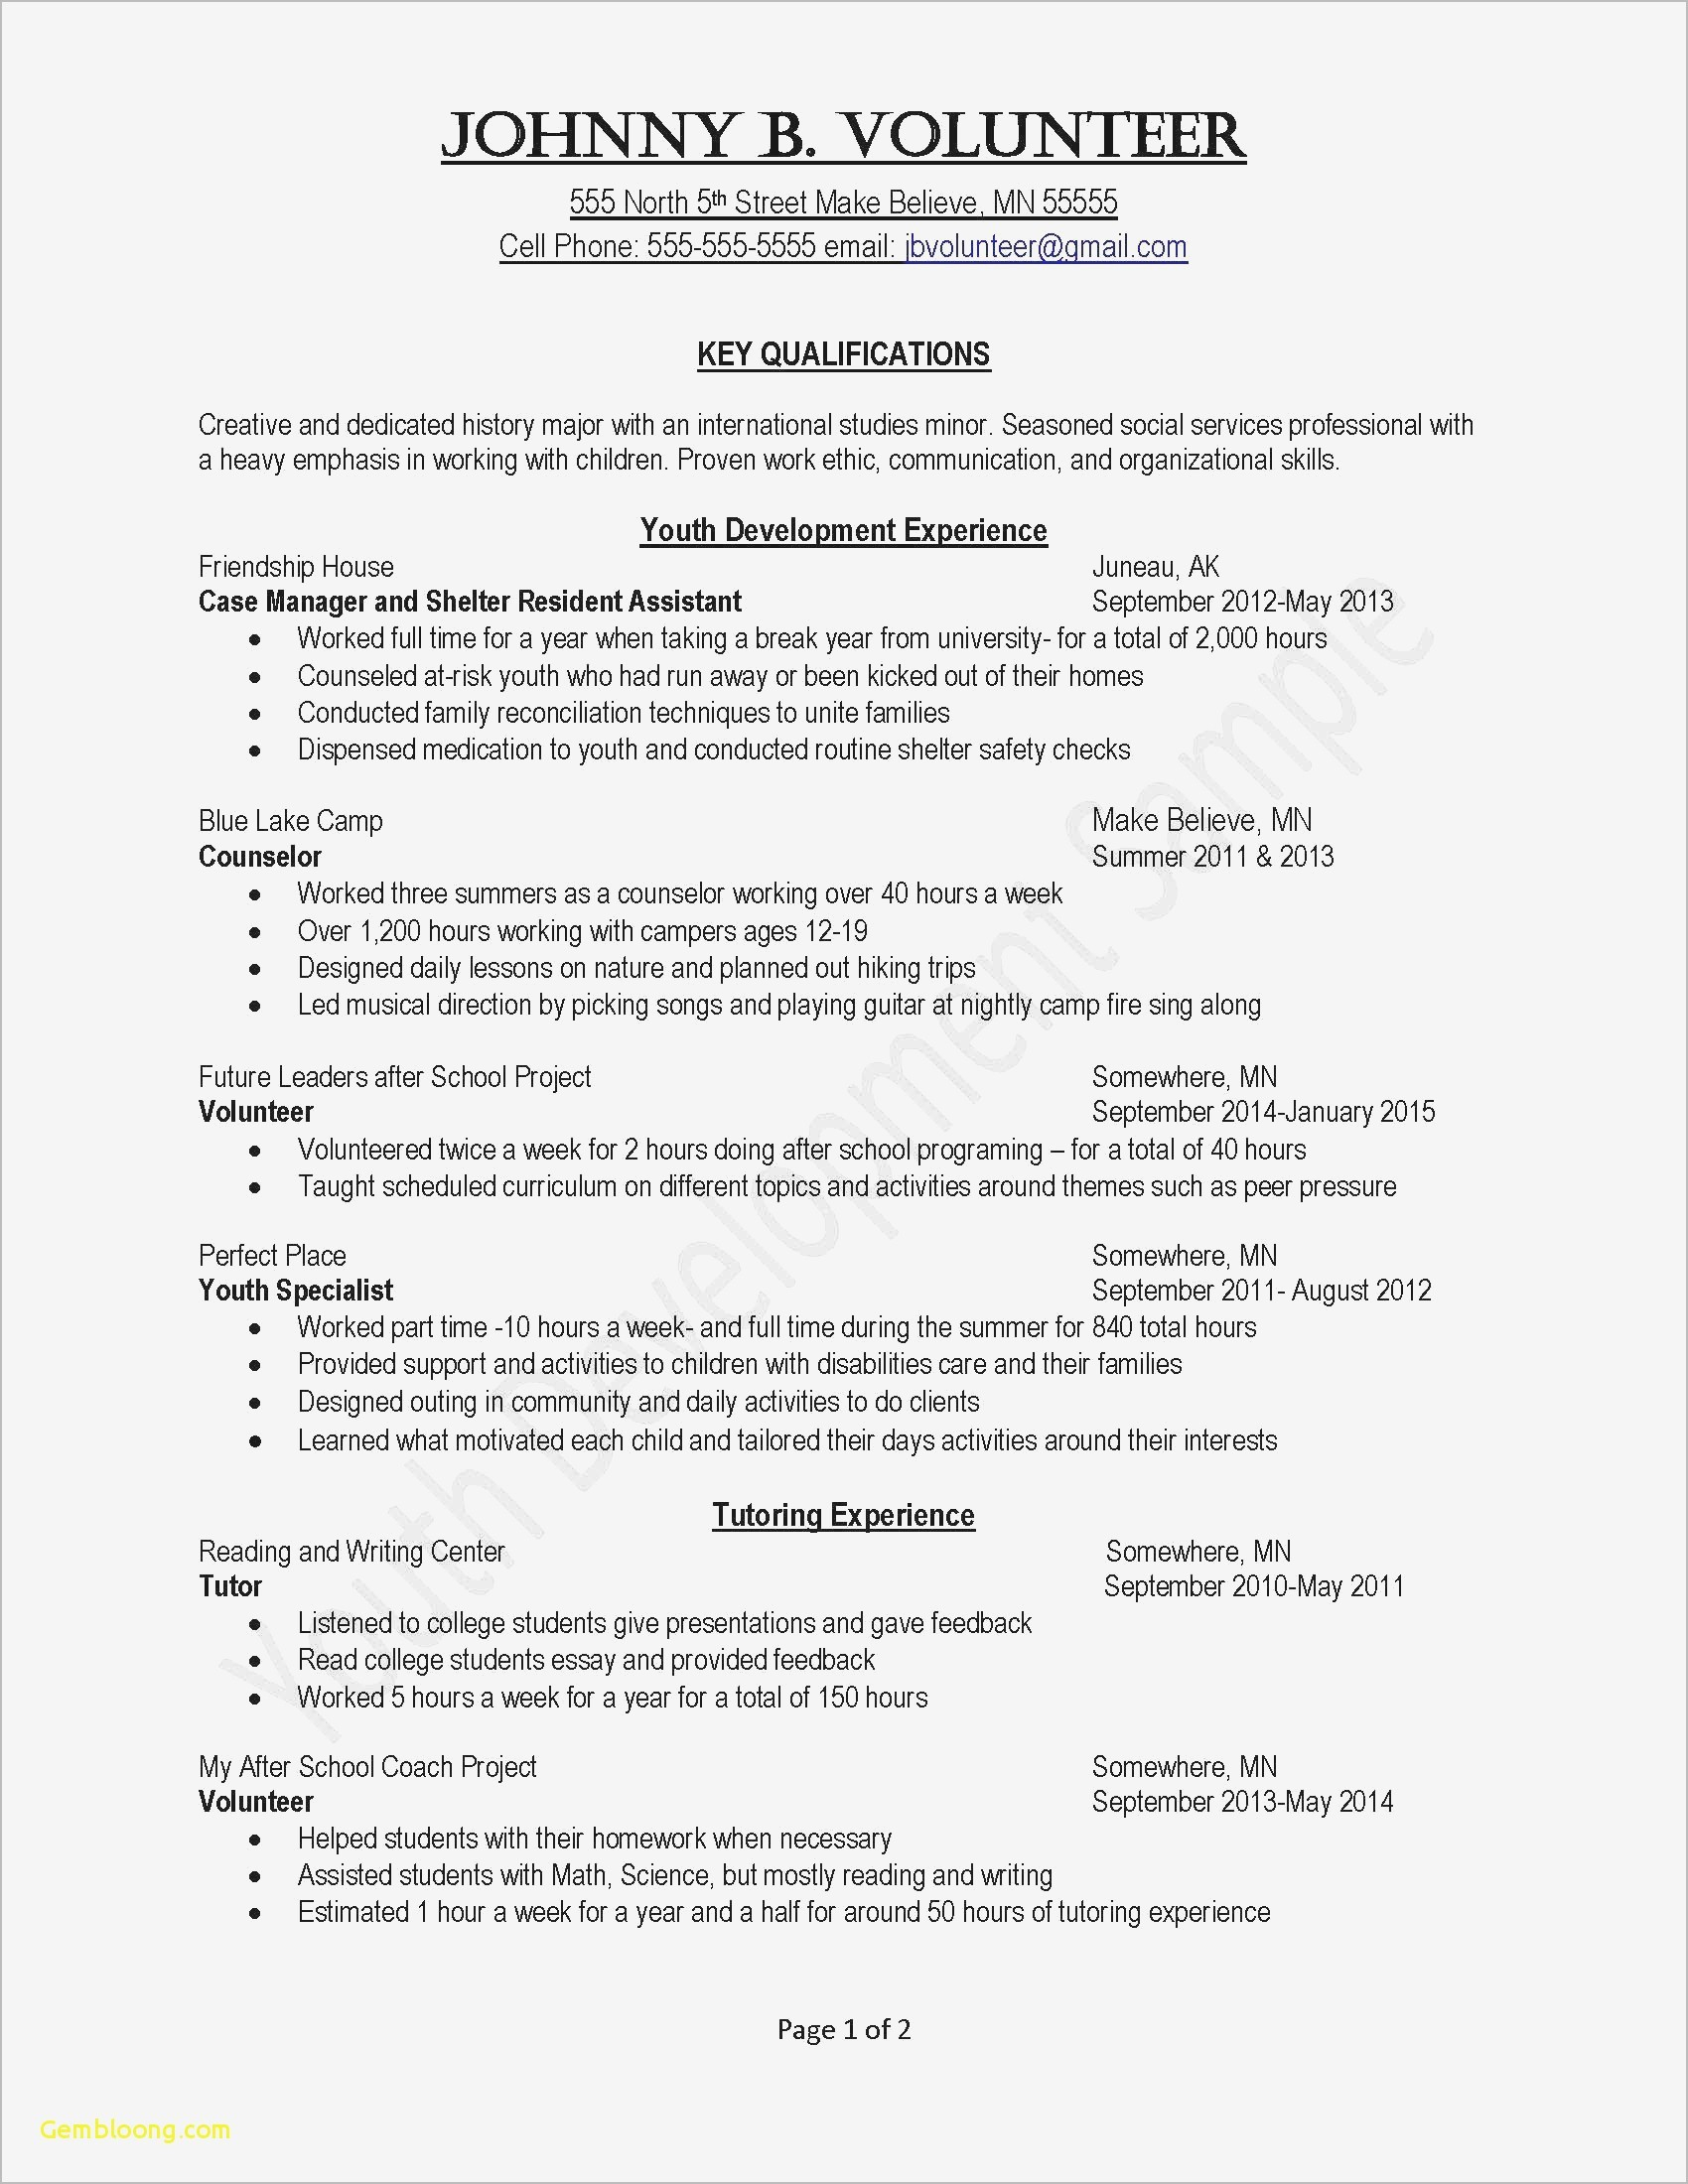 Cover Letter Template Word - Job Fer Letter Template Us Copy Od Consultant Cover Letter Fungram